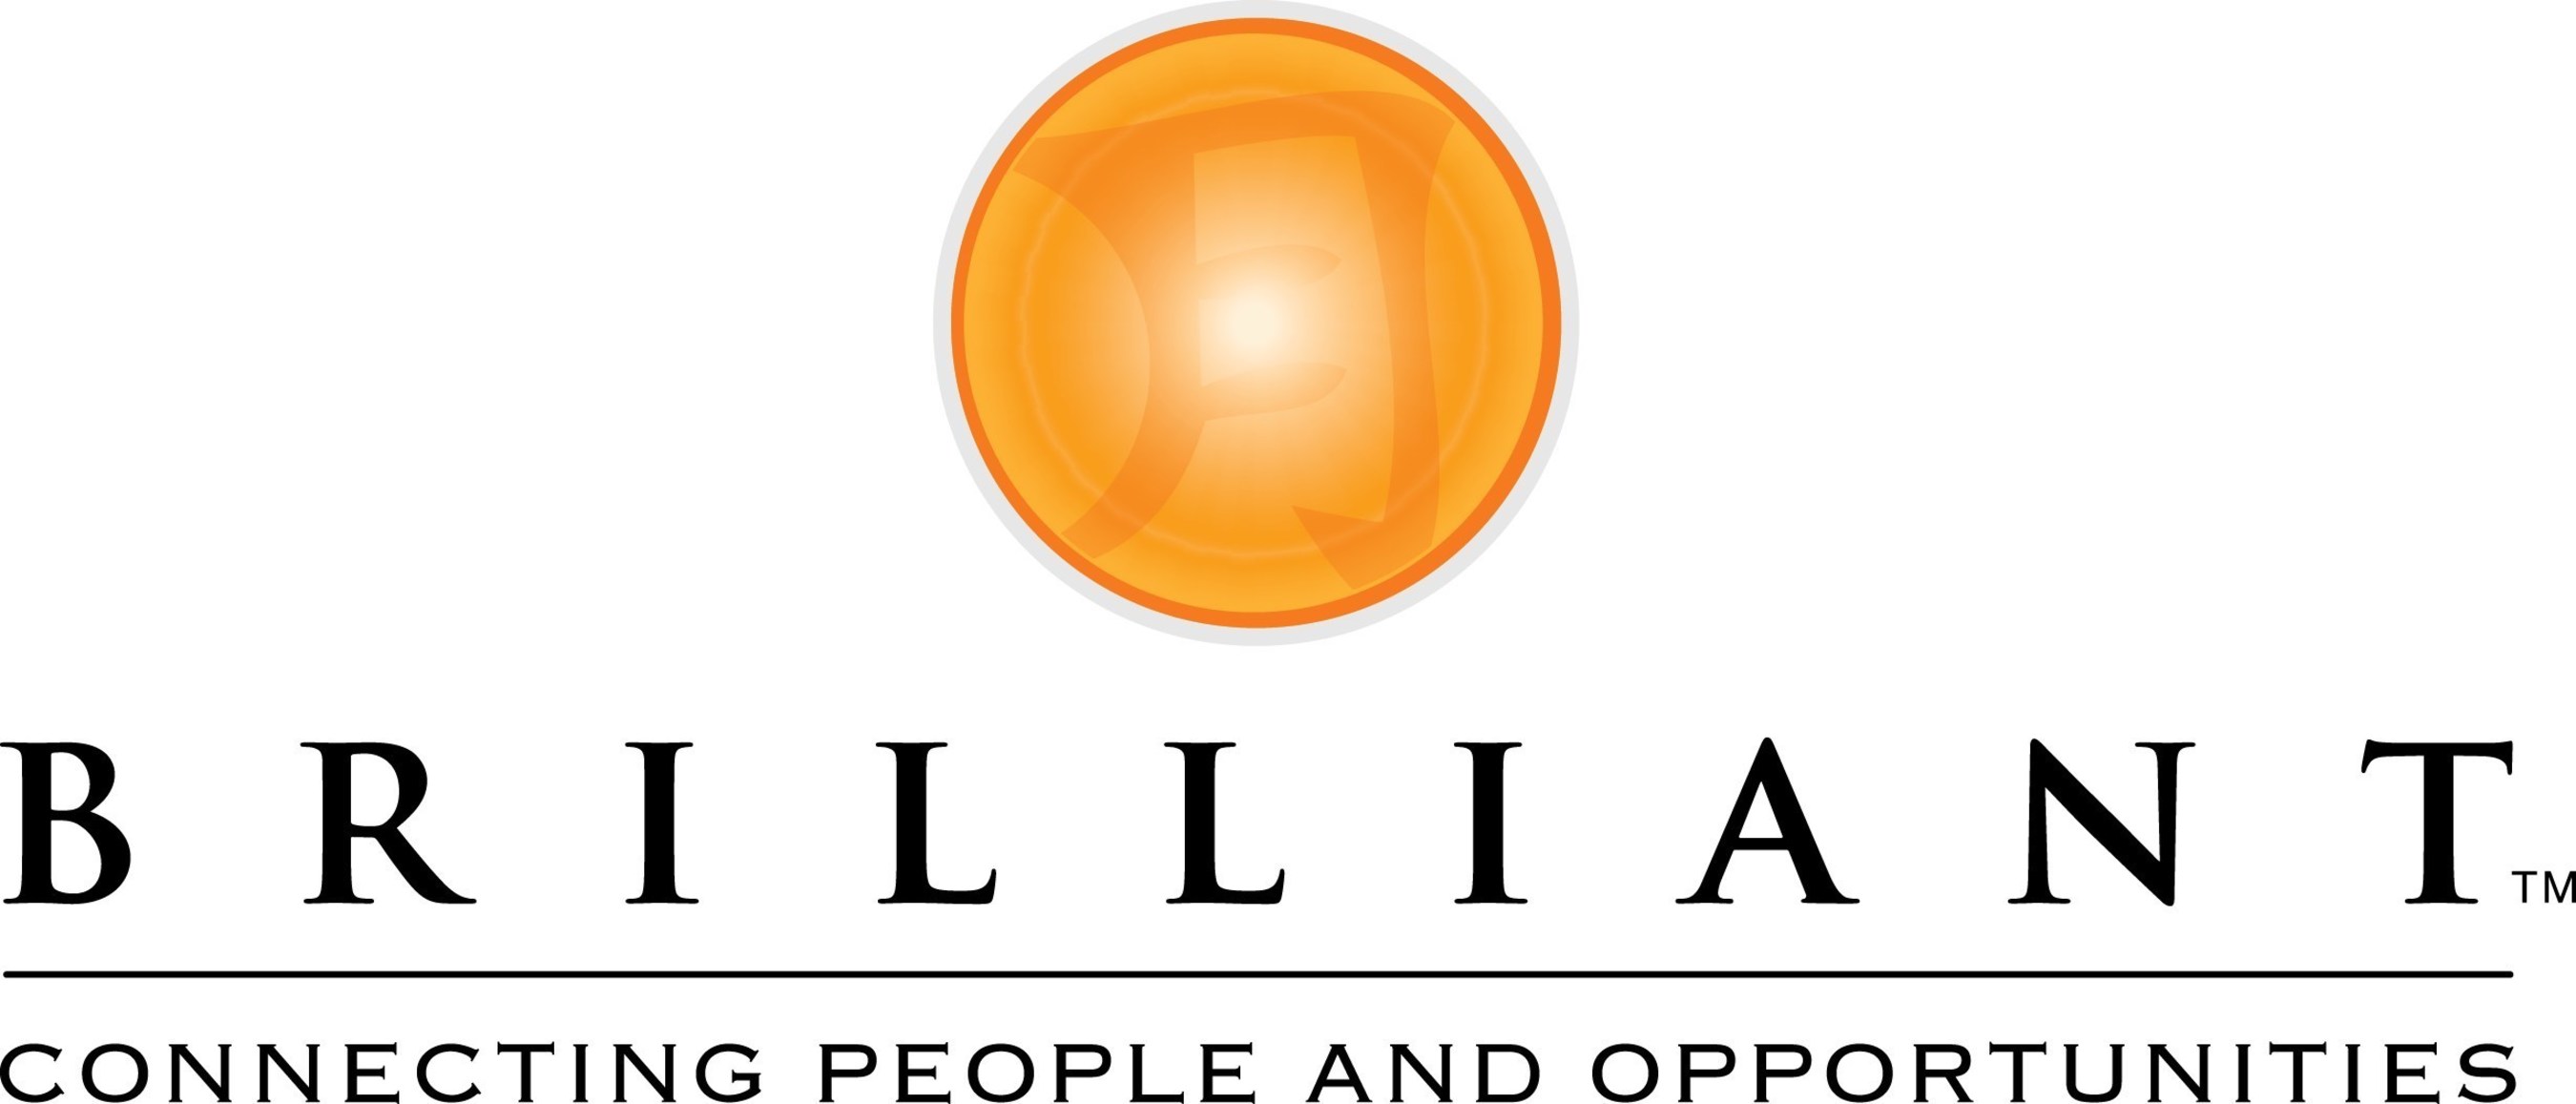 Brilliant™ is a search, staffing & management resources firm specializing in the accounting, finance & IT professions throughout the greater Chicago & south Florida markets. To learn more, visit www.brilliantfs.com, call 312.582.1800 or search @BrilliantFS on social media.